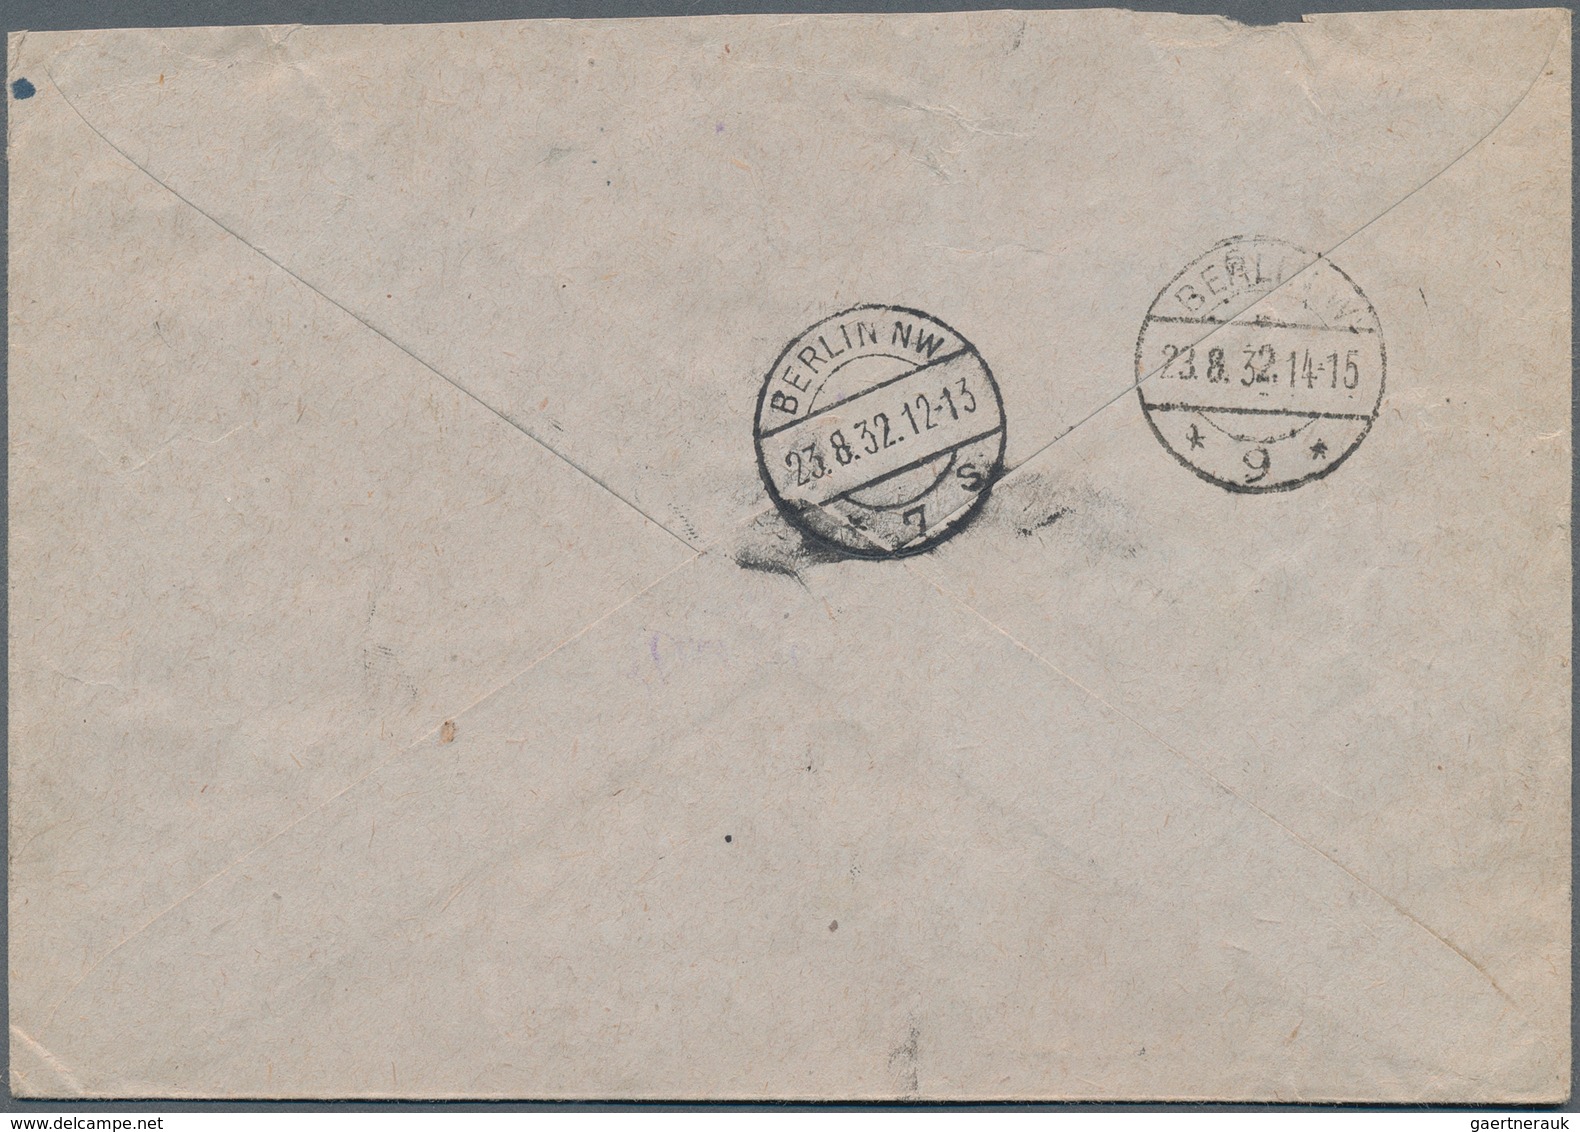 16190 Sowjetunion: 1931/33, covers (6) all to Germany inc. uprated stationery envelope 15 K. registered (2